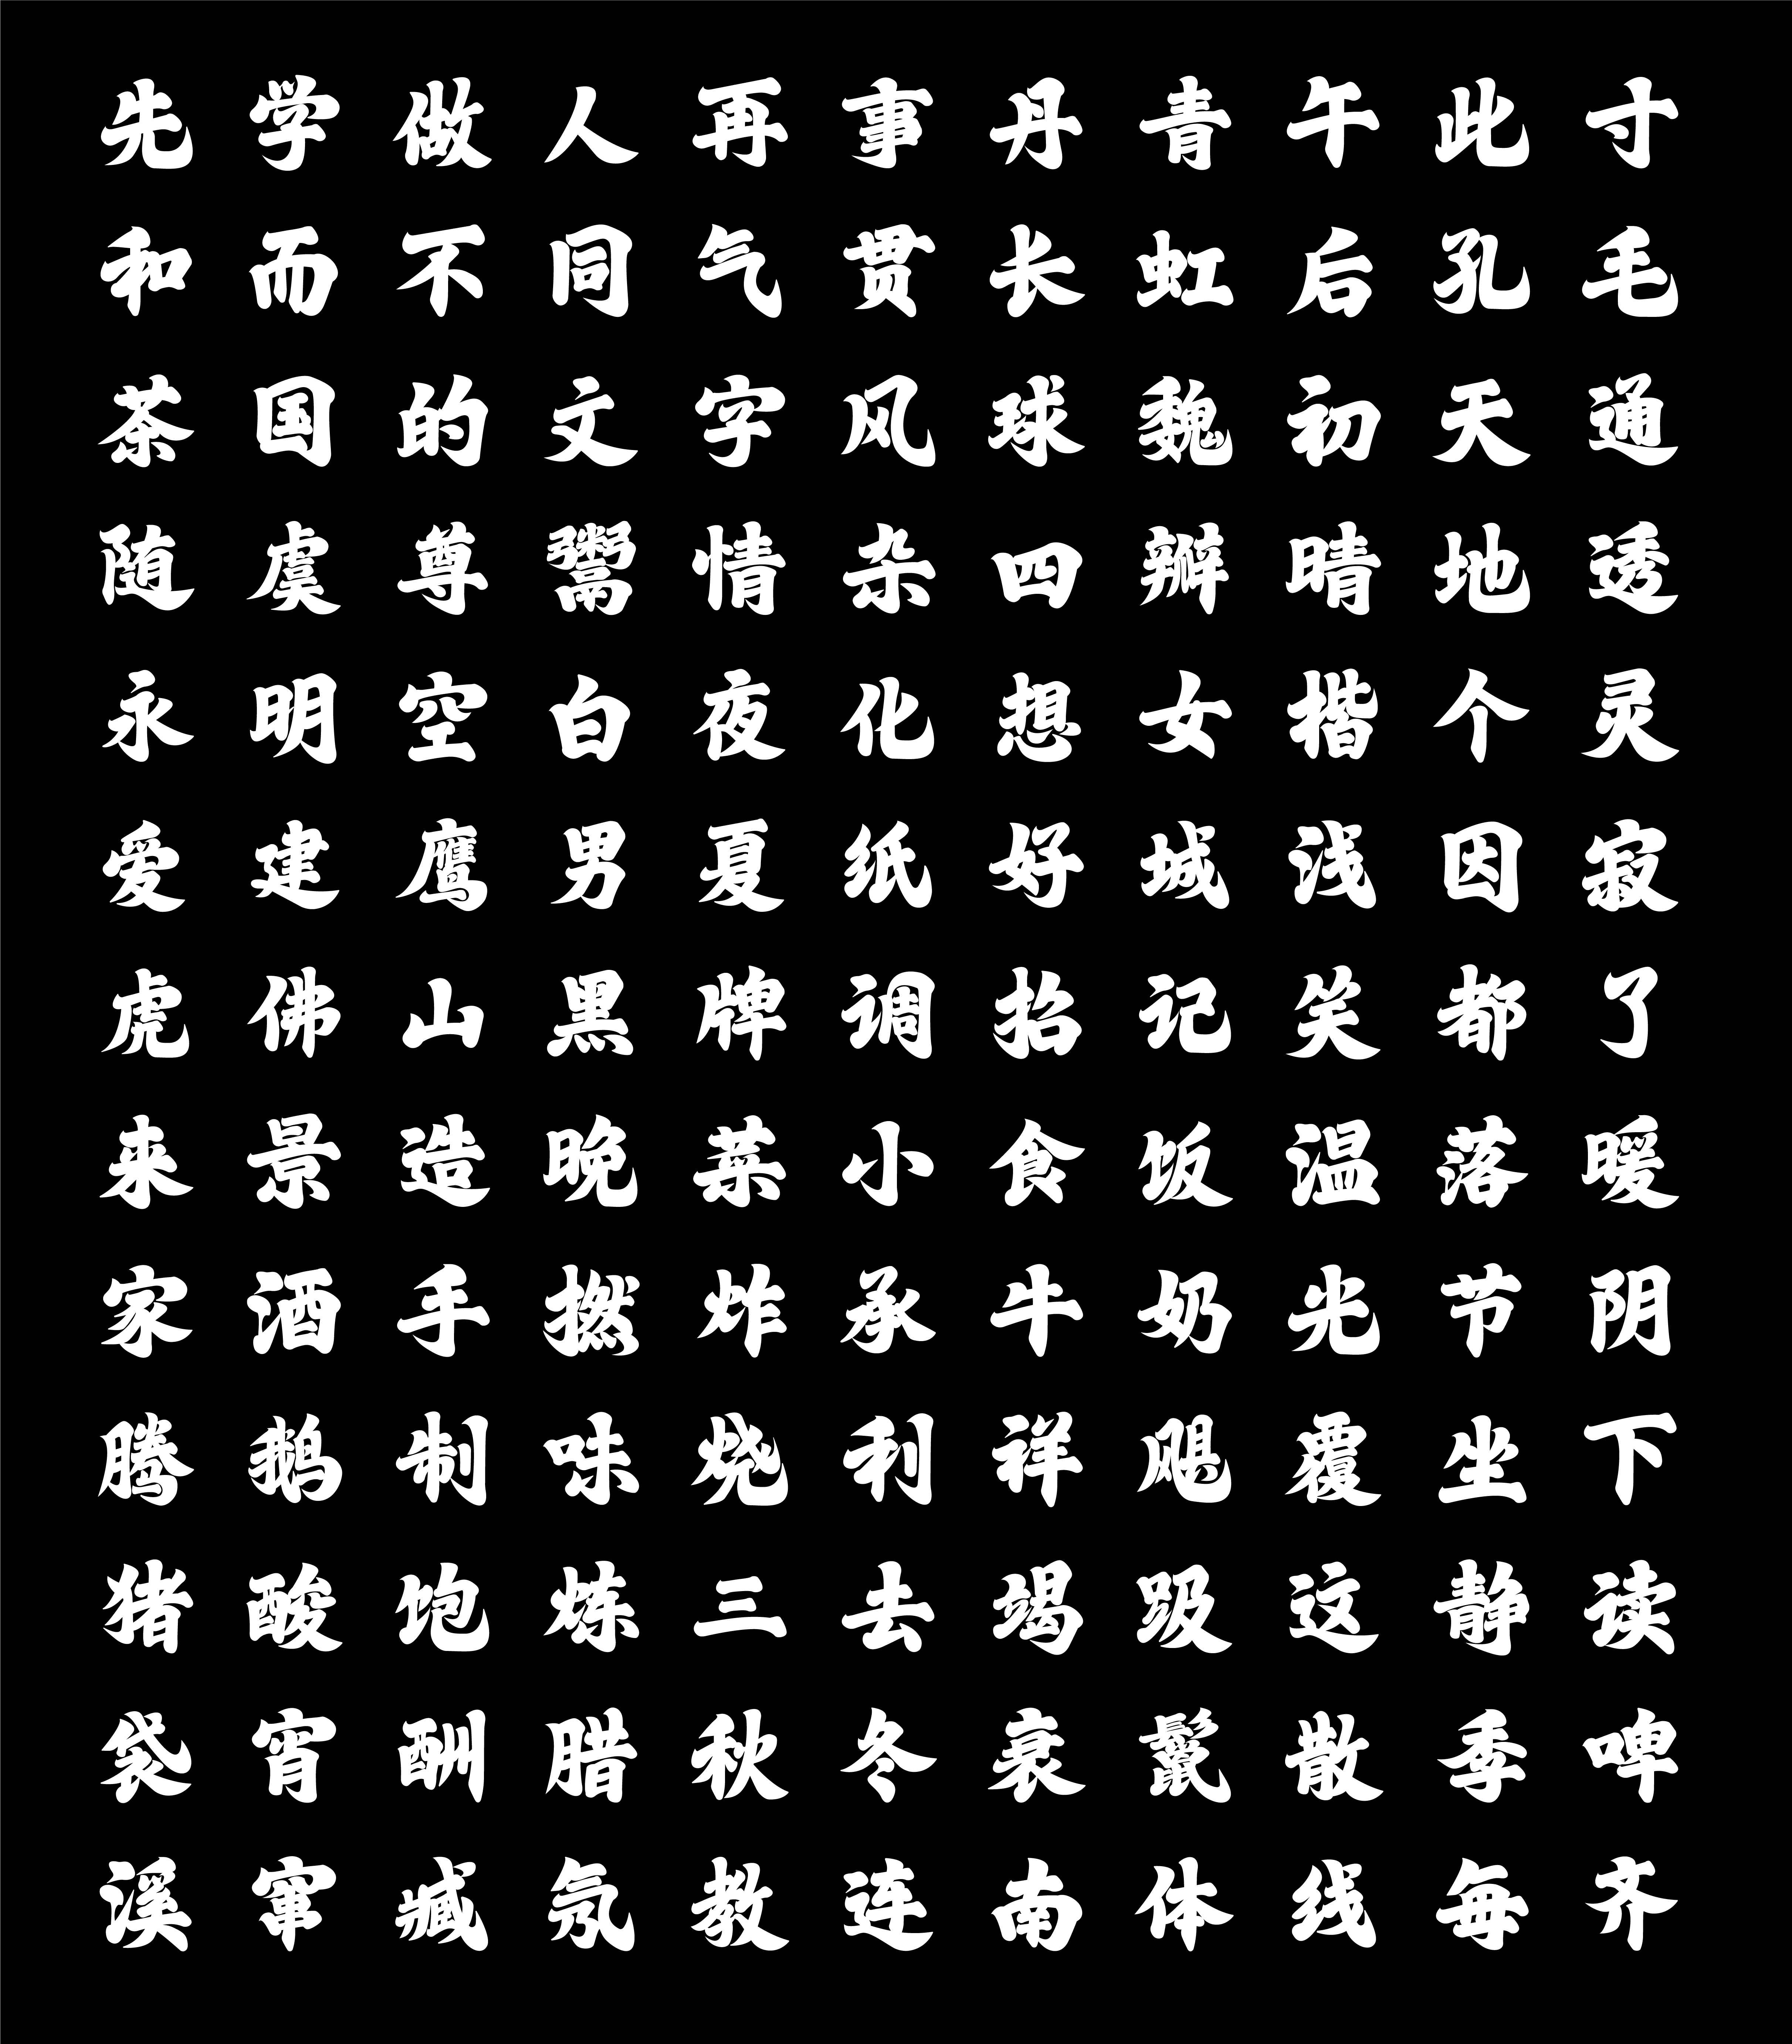 21P Collection of the latest Chinese font design schemes in 2021 #.231